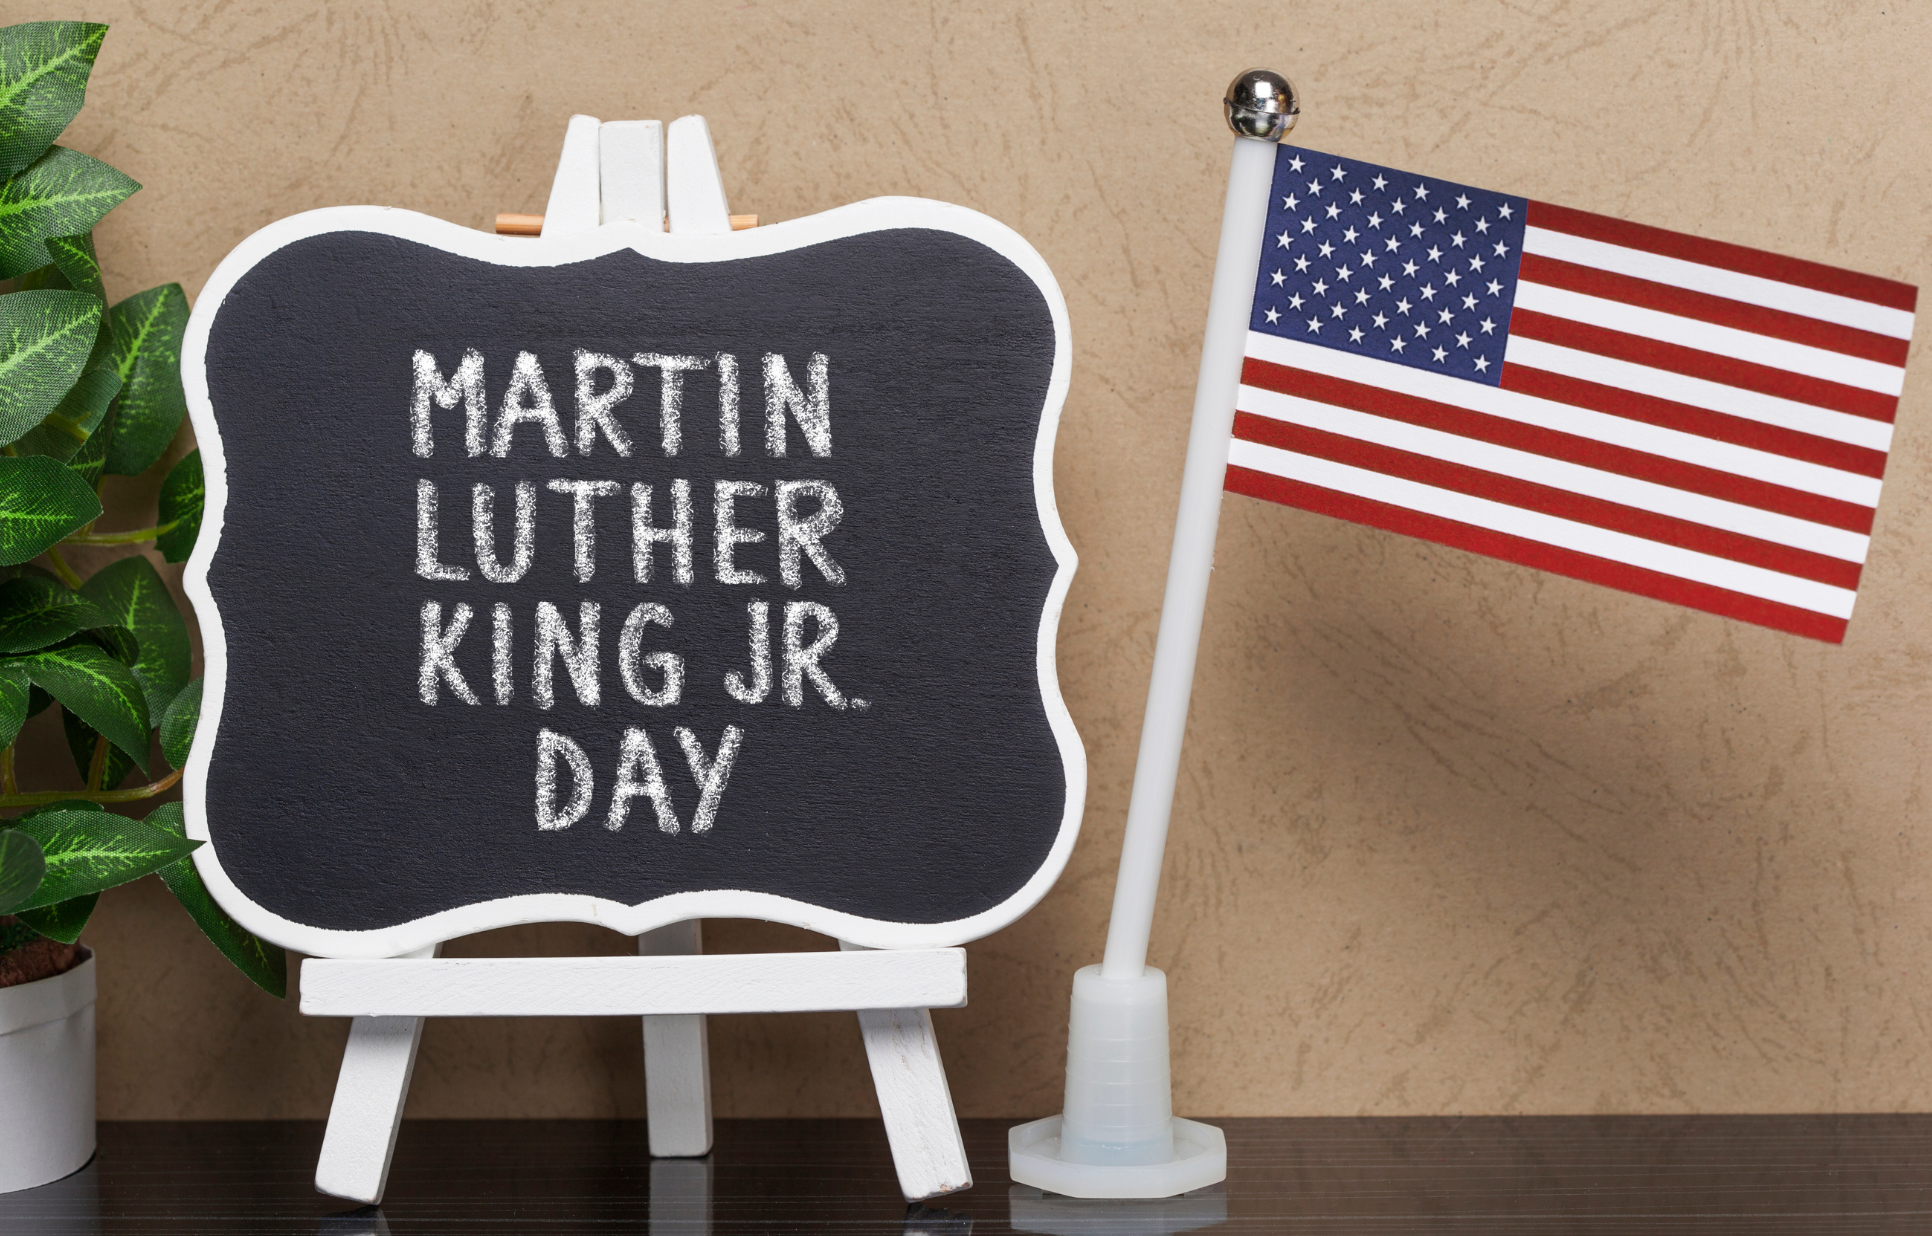 4 Ways to Honor Martin Luther King Jr. With Your Kids